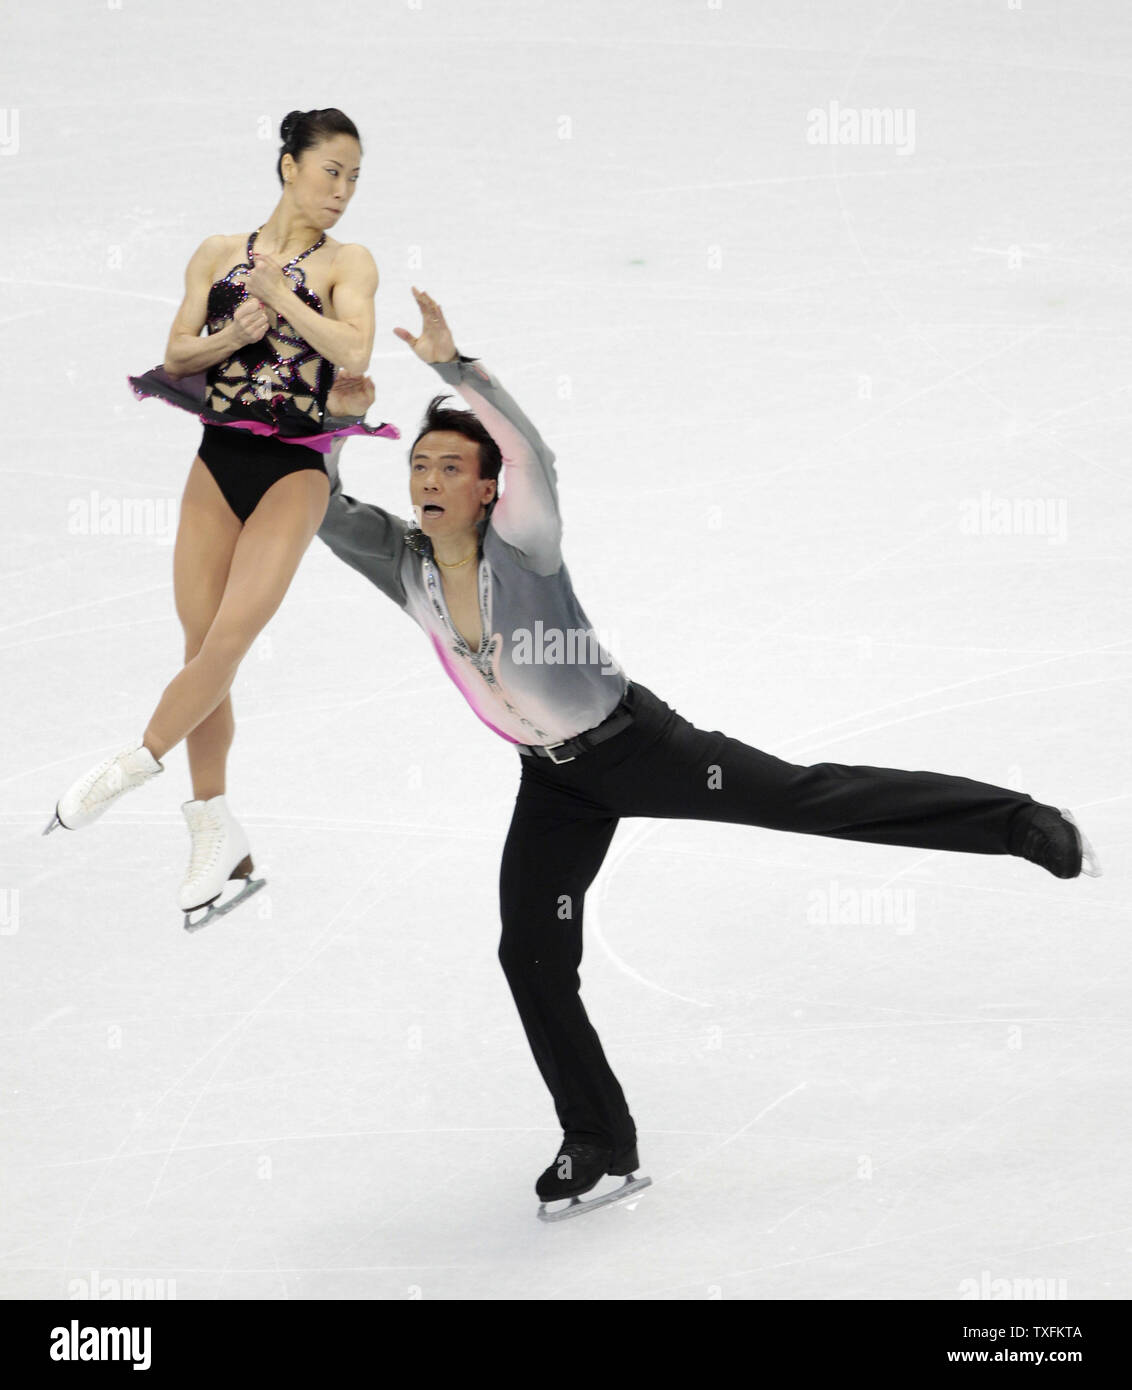 Dan Zhang (L) and Hao Zhang of China skate during their short program competition at the 2010 Winter Olympics at Pacific Coliseum in Vancouver, Canada on February 14, 2010.     UPI/Brian Kersey Stock Photo